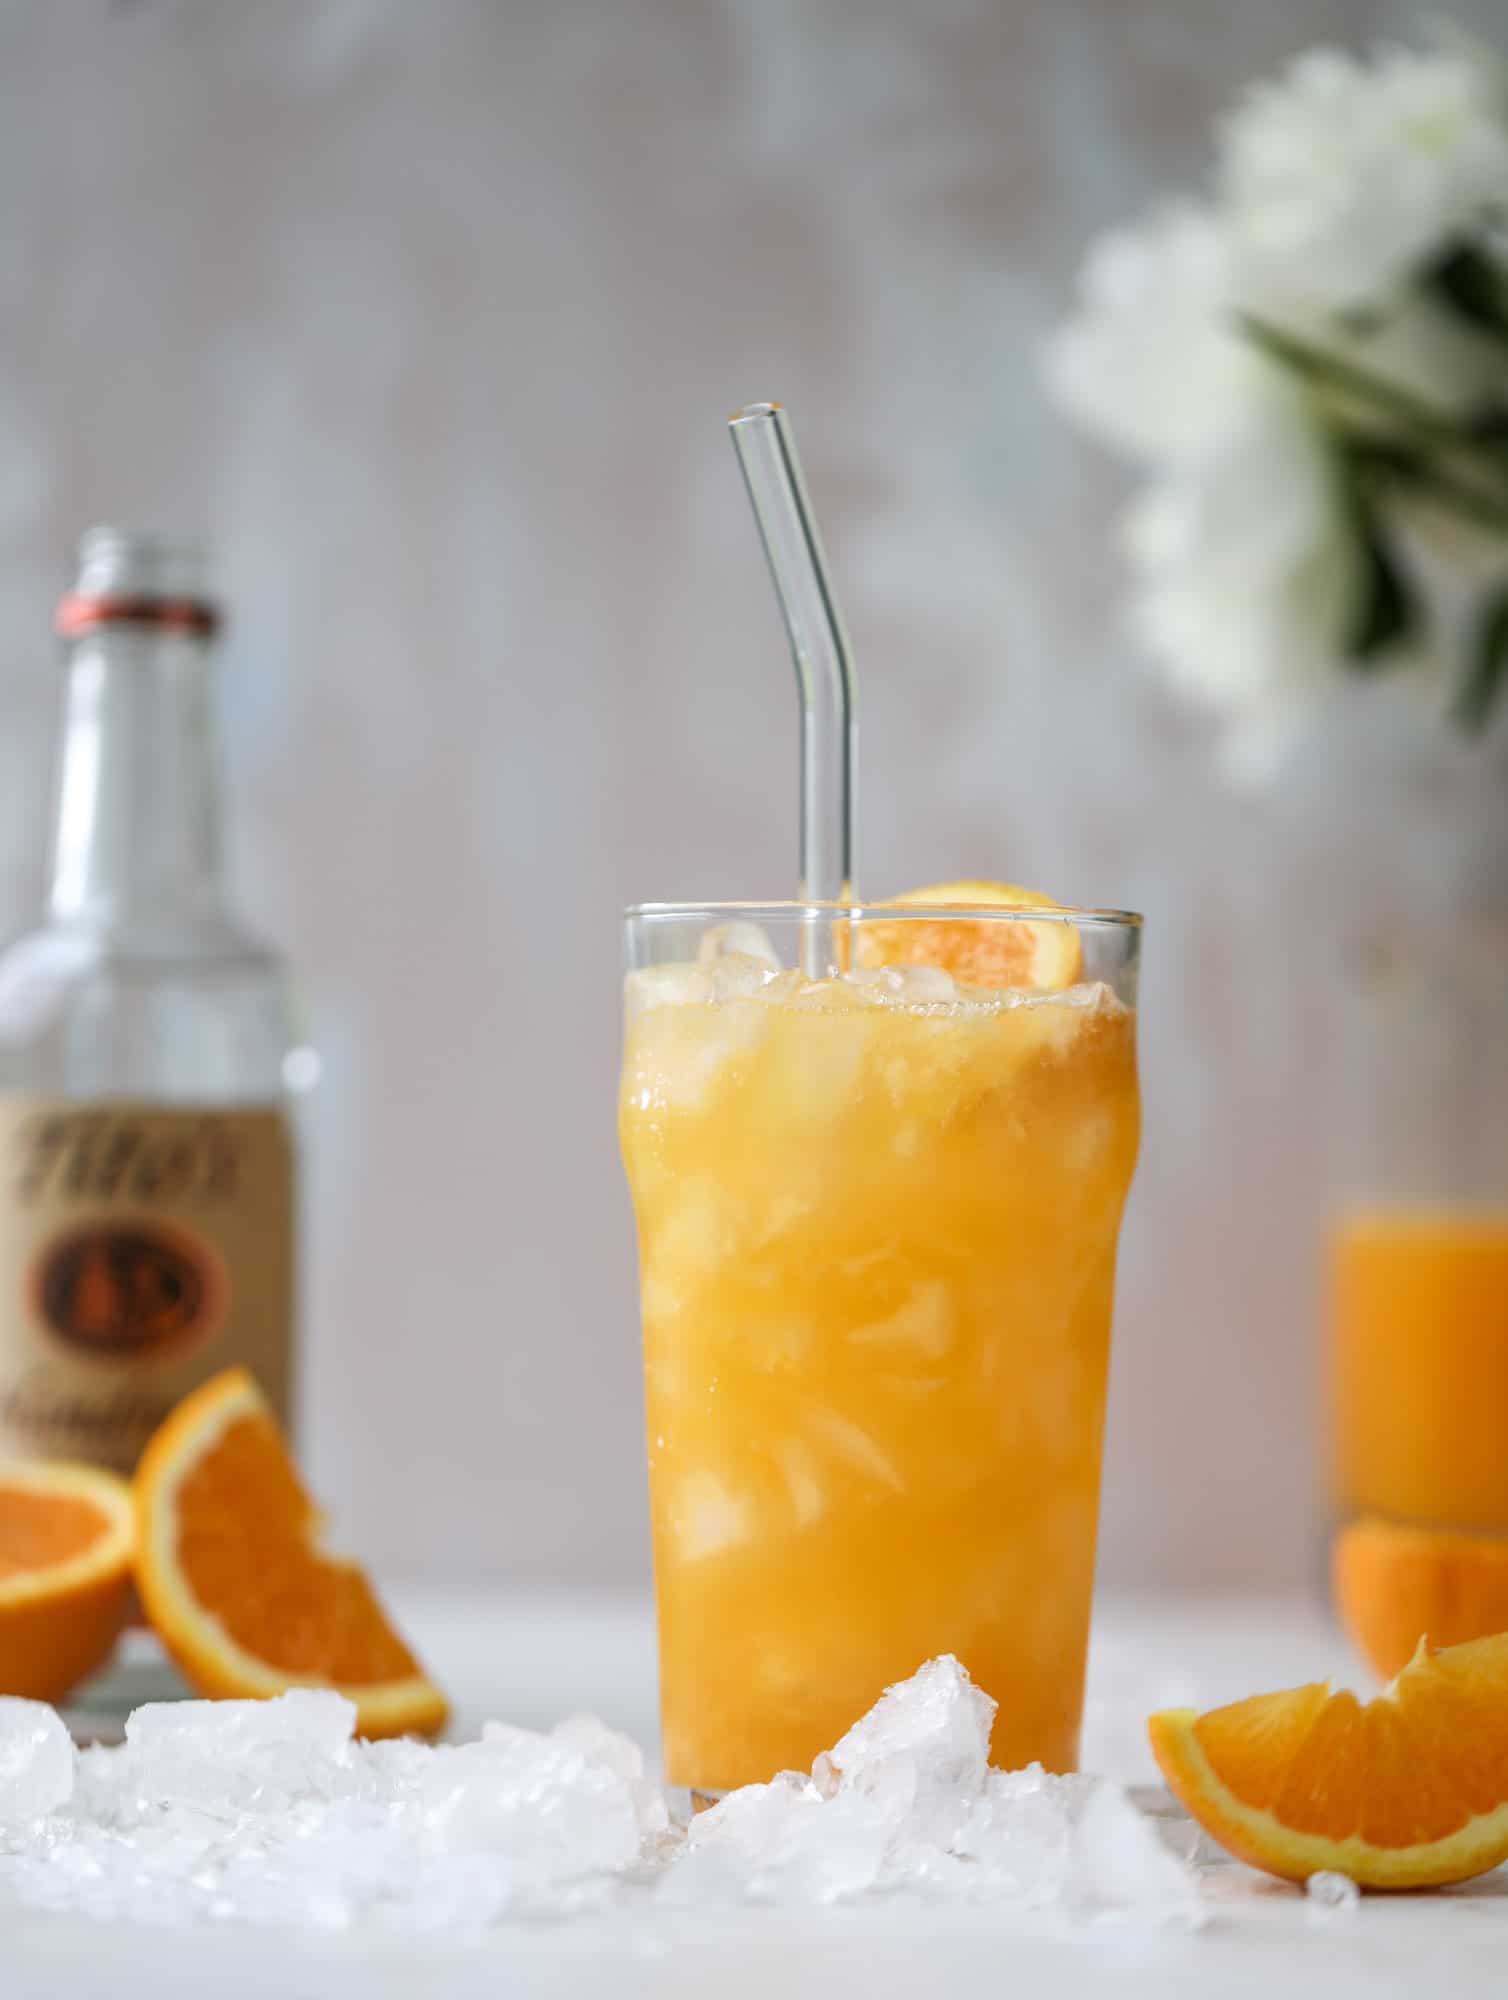 This orange crush is a copycat cocktail from the ones served in Ocean City, Maryland at the beach all summer long! It's one entire freshly squeezed orange with vodka and lemon lime soda and it tastes like heaven. Super refreshing and perfect for summer. I howsweeteats.com #orange #crush #cocktail #ocean #city #vodka